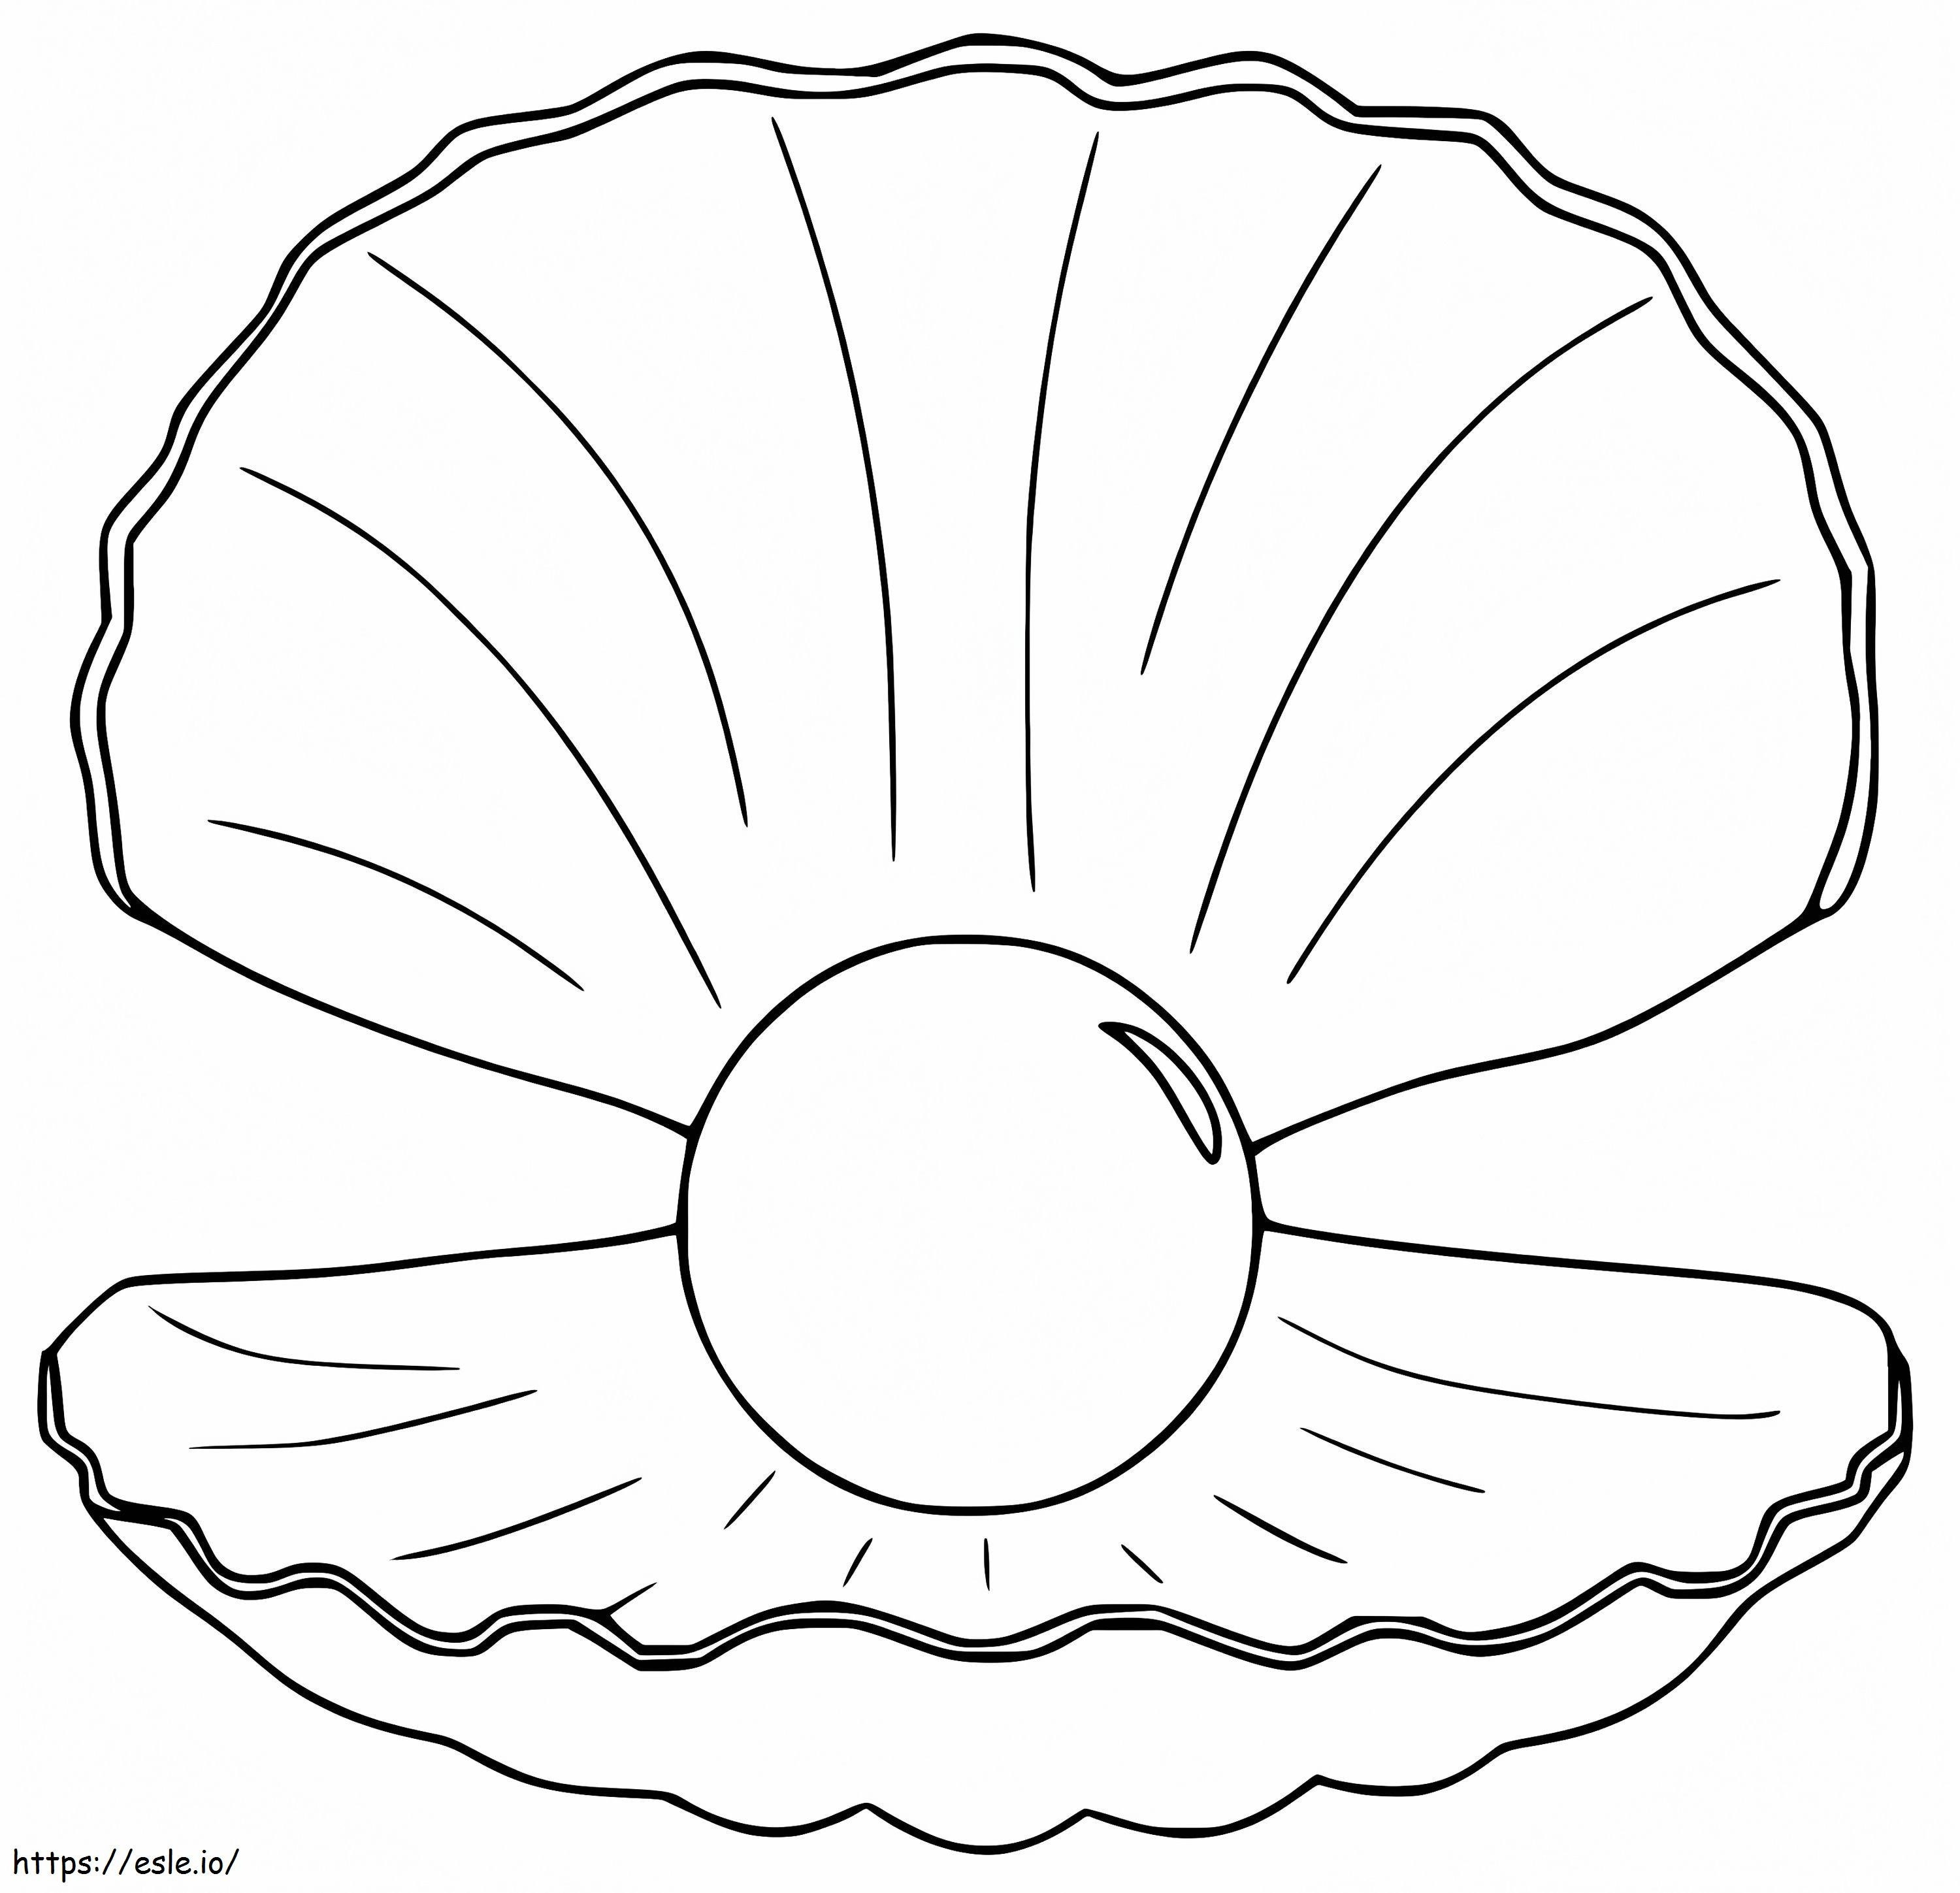 Scallop With Big Pearl coloring page